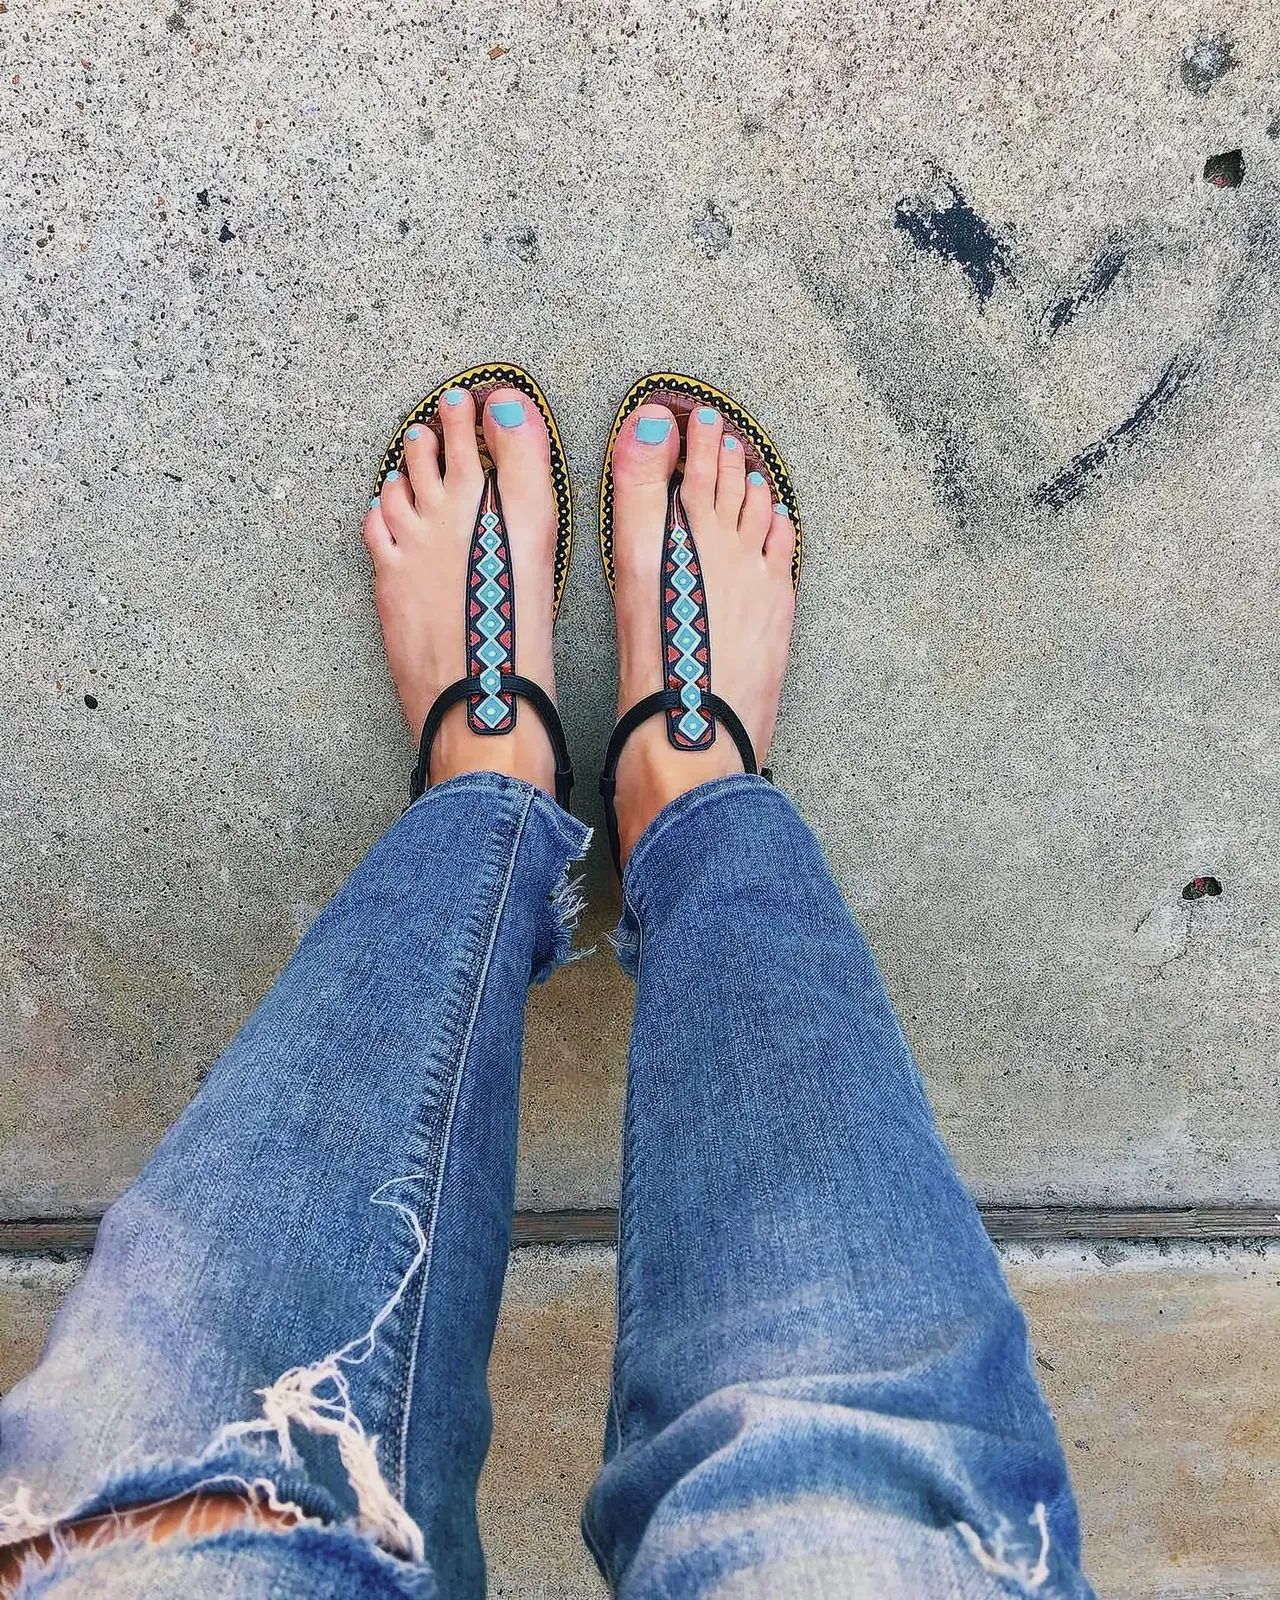 Stylish and affordable Sam Edelman Leather Sandals with tribal pattern, painted toenails, and rolled-up denim jeans.